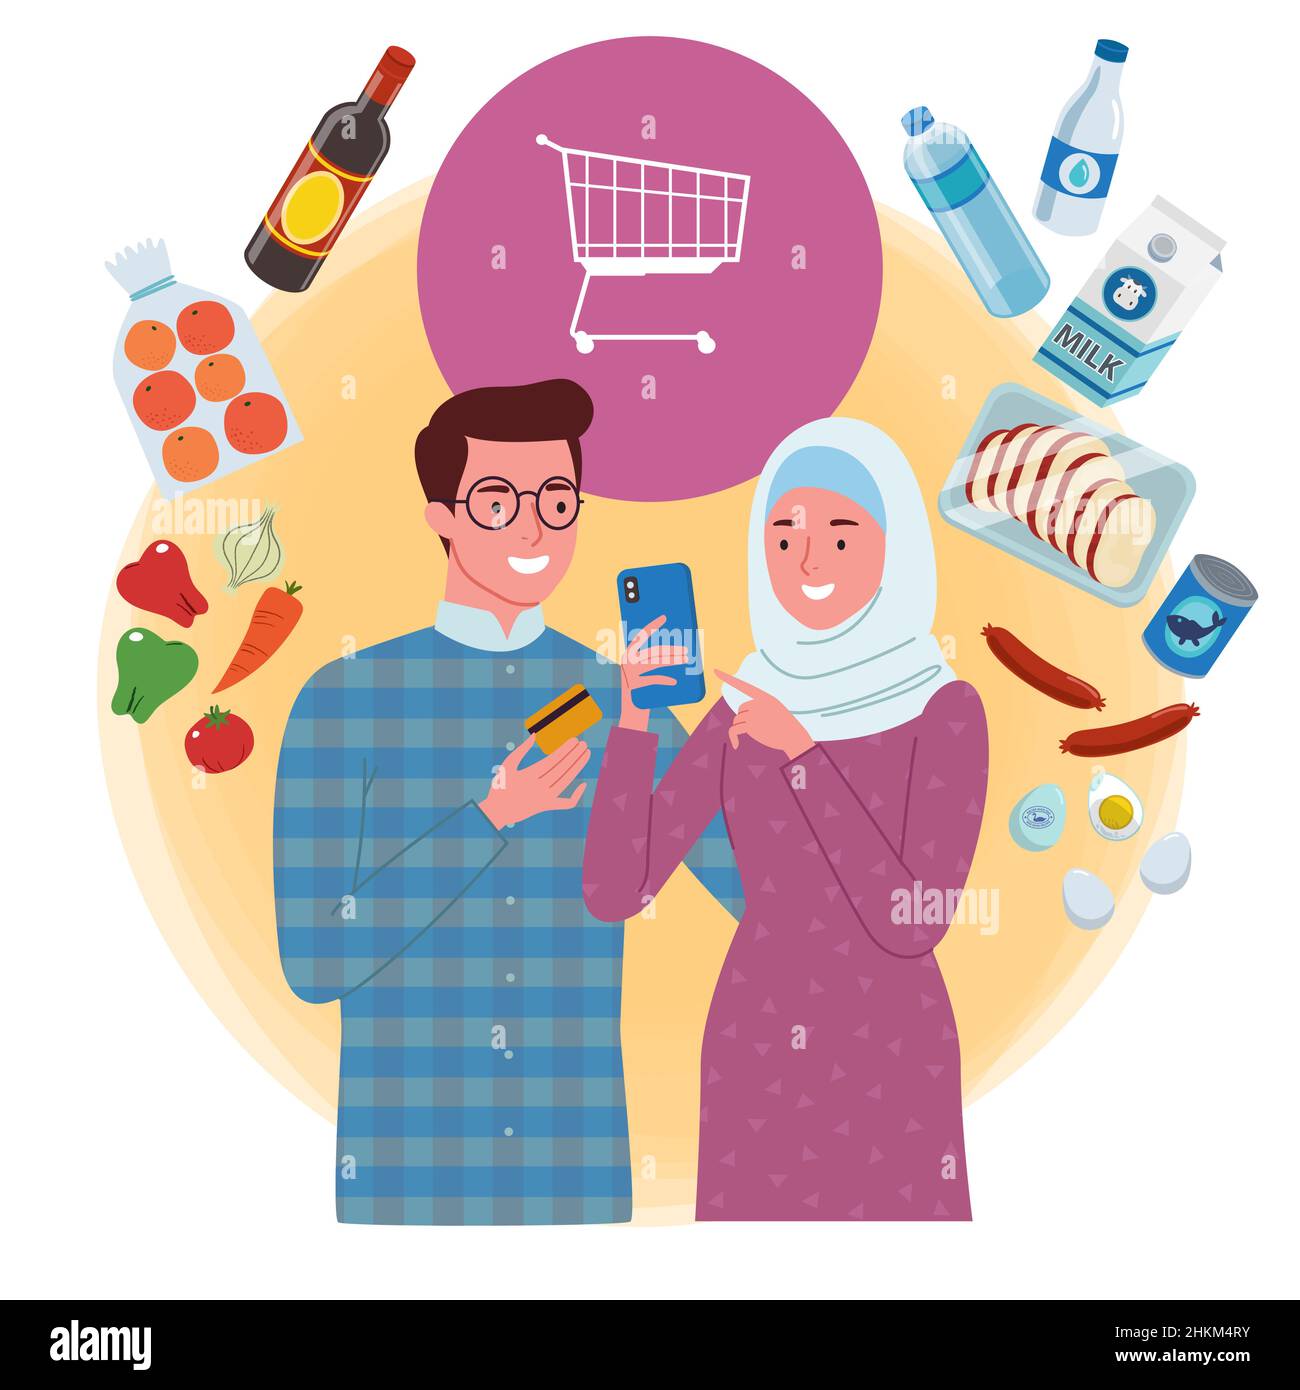 a Muslim couple do a groceries online shopping together on a mobile phone. The man is holding a card while the woman is holding a phone. Stock Vector